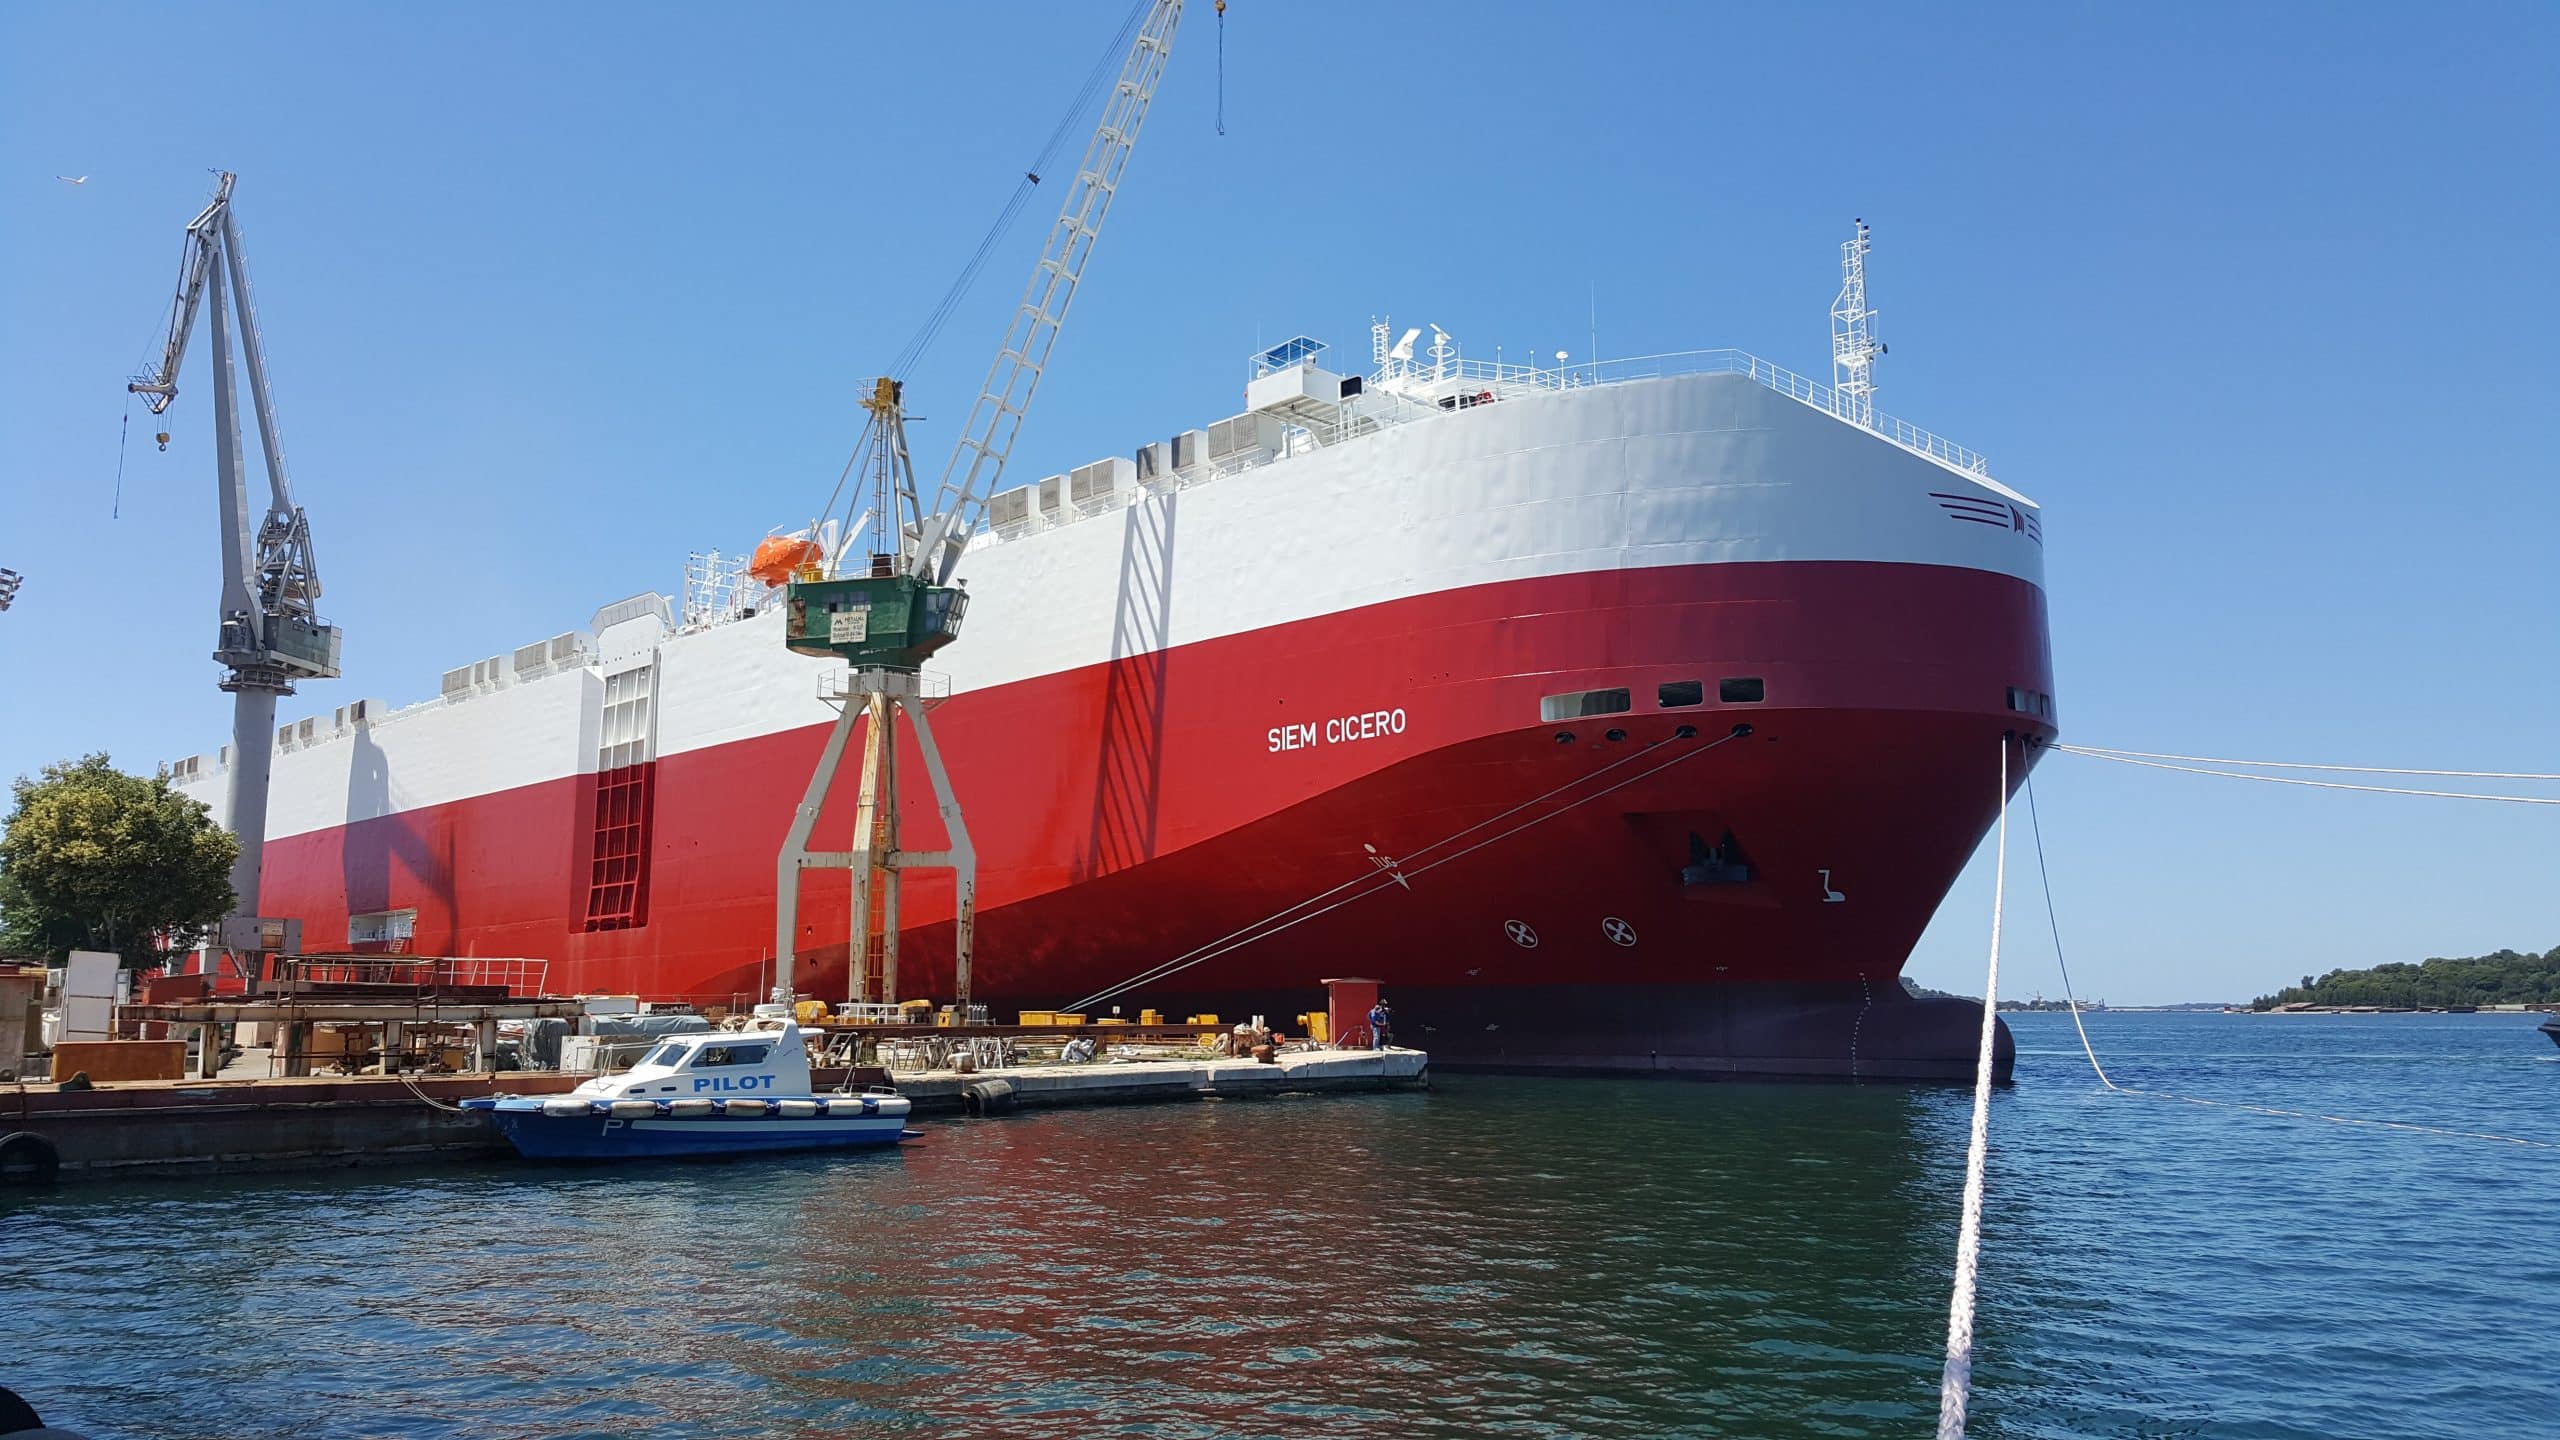 A large red and white ship docked